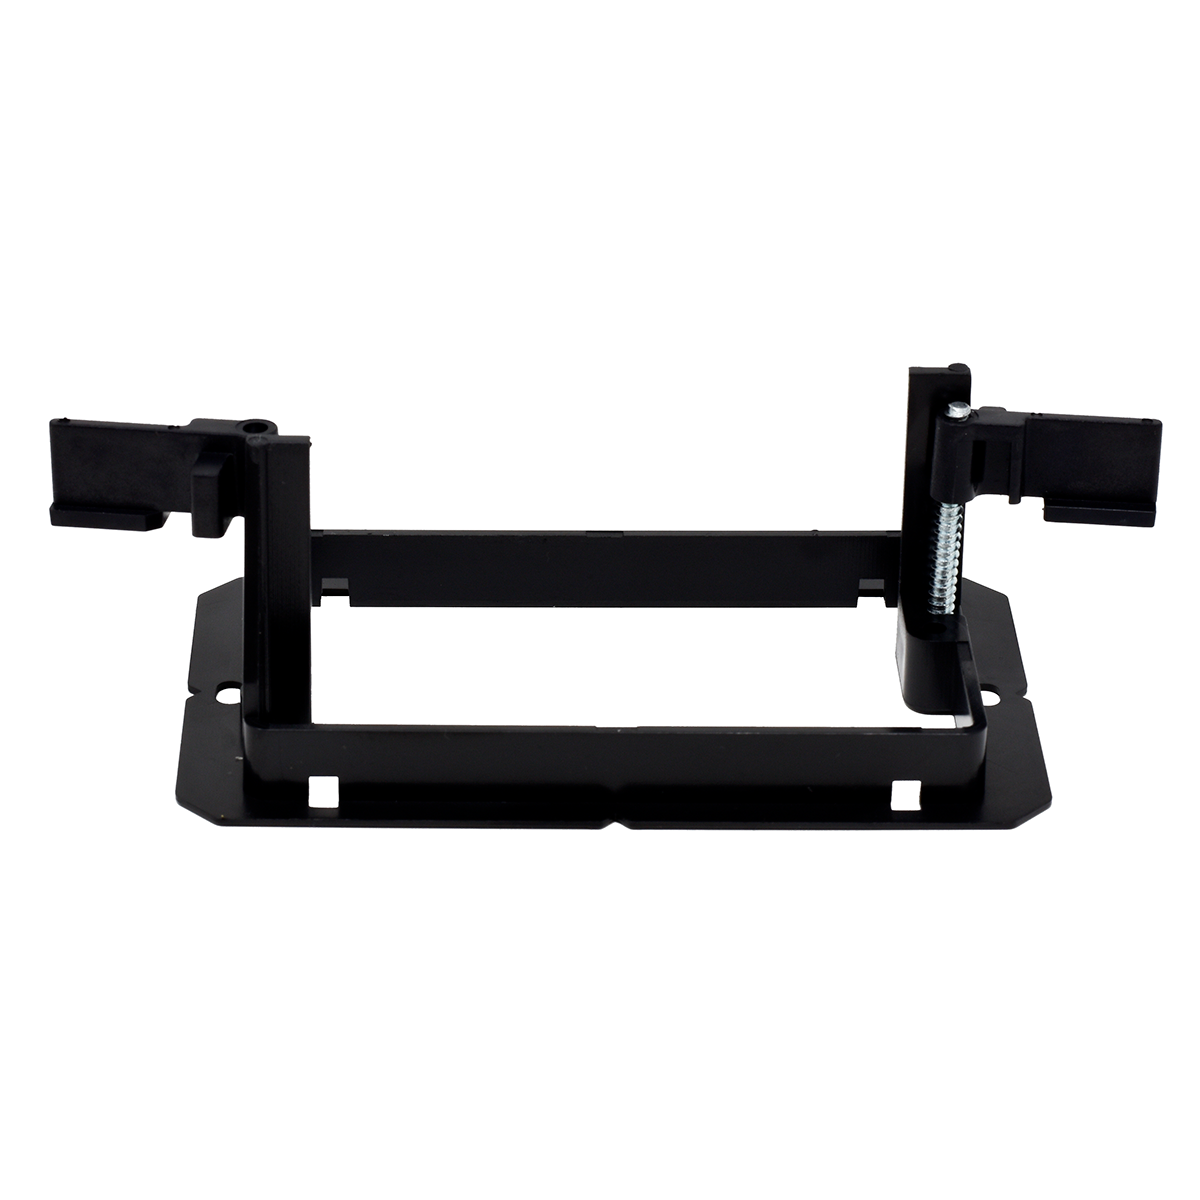 1 Gang Low Voltage Mounting Bracket (Side View)